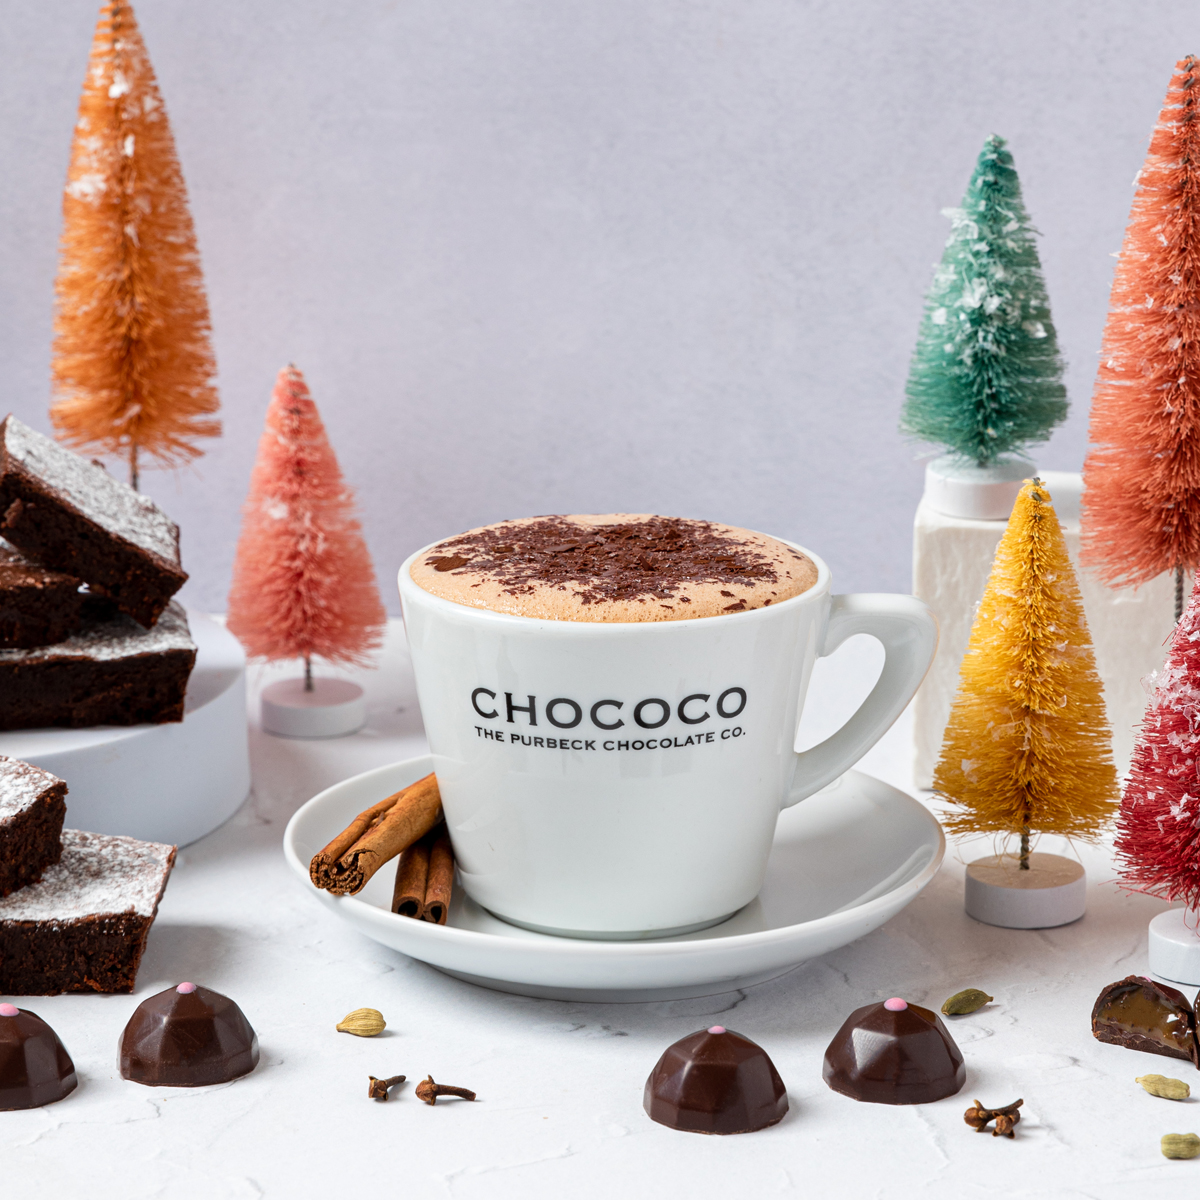 'Tis the season of Speculaas Spice Chococo-style!